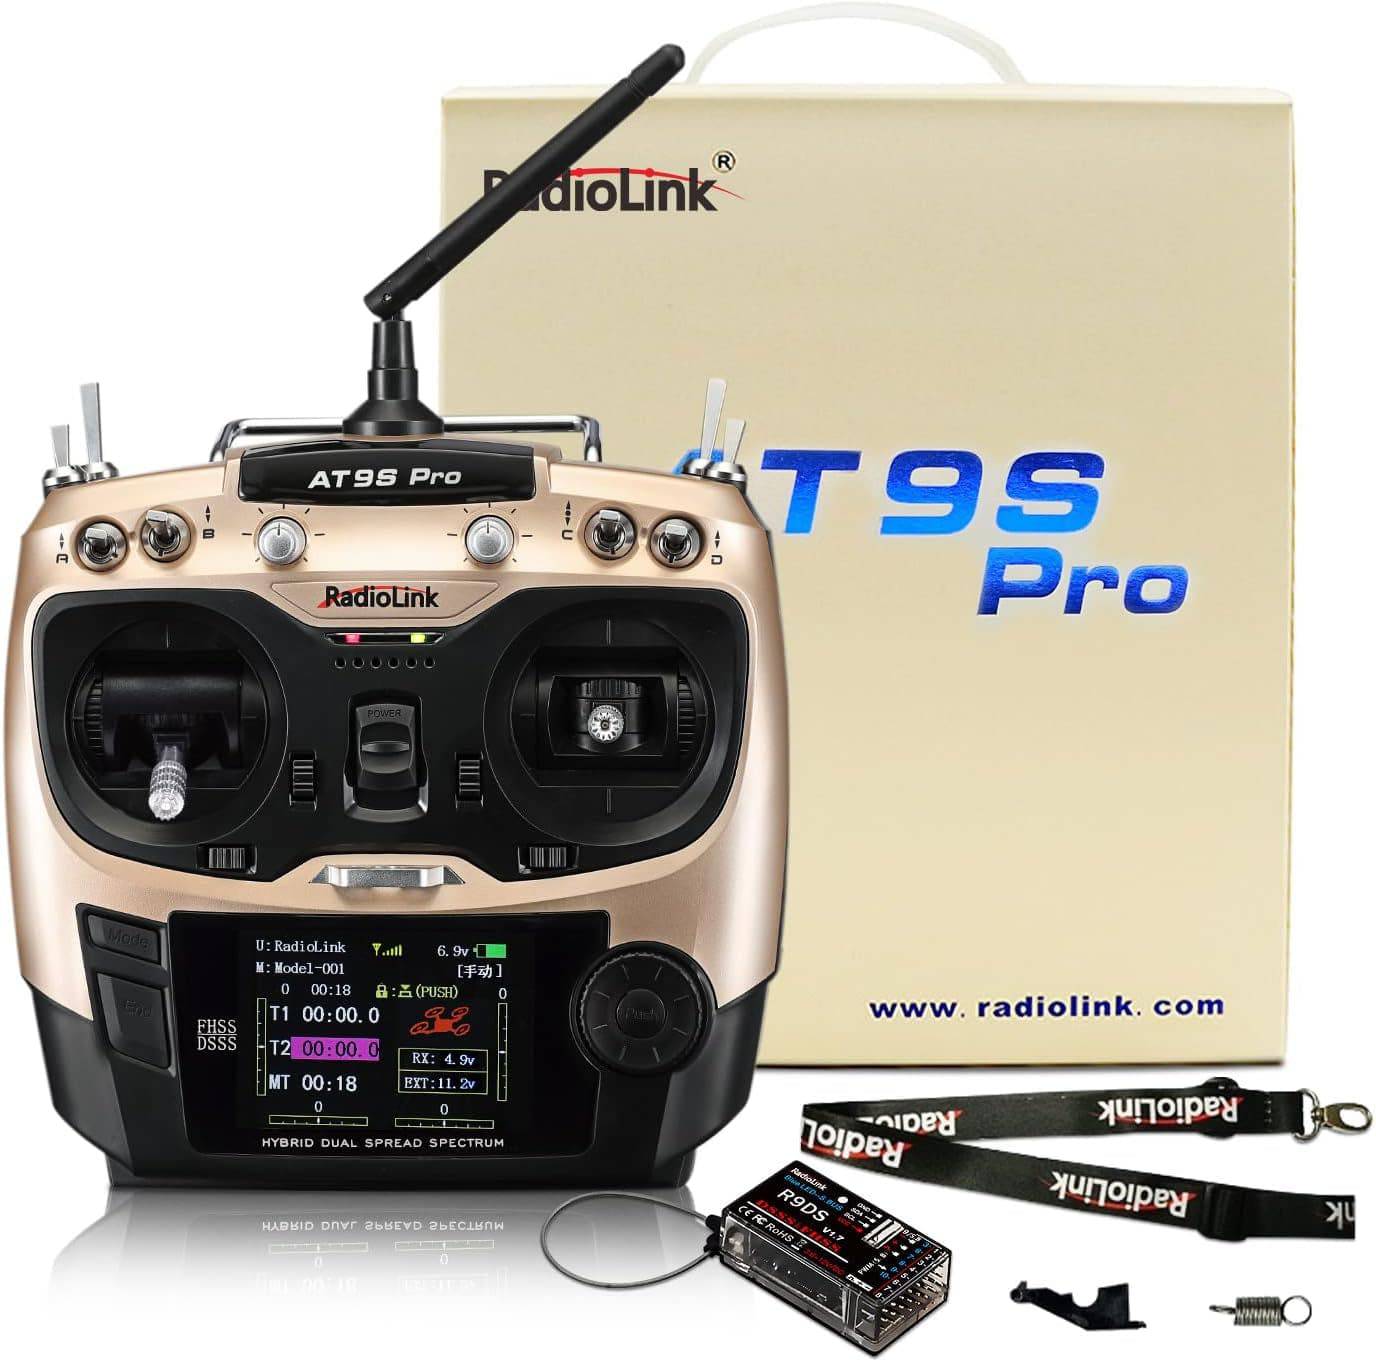 Radiolink AT9S Pro 2.4GHz 12CH RC Drone Remote with R9DS Receiver, AT9S Pro Flight Controller - REES52